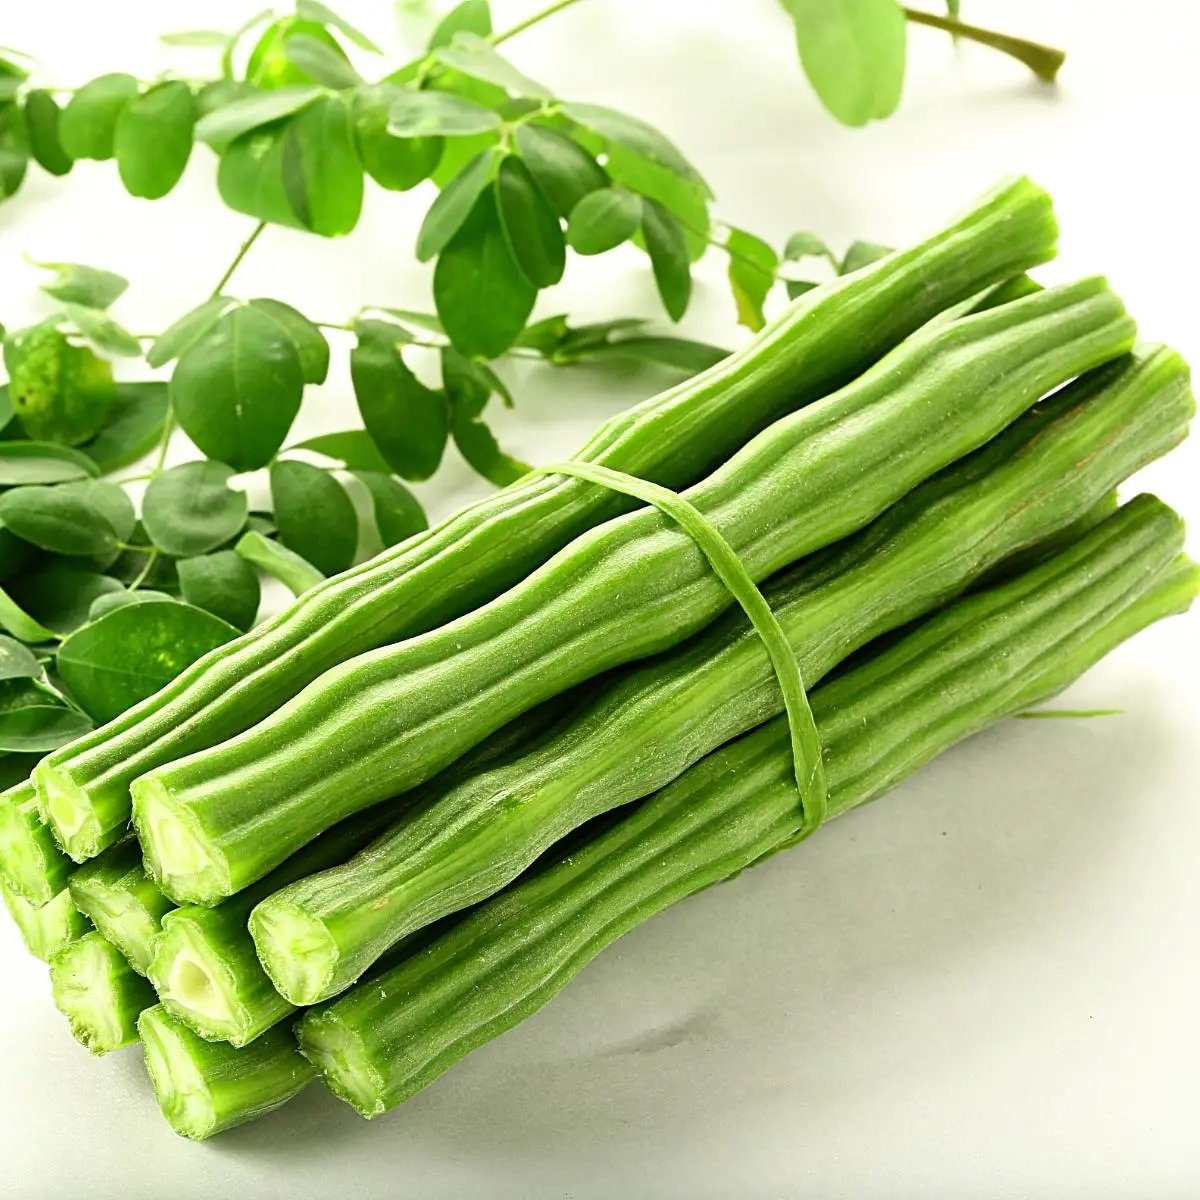 This is how a moringa or drumstick looks.